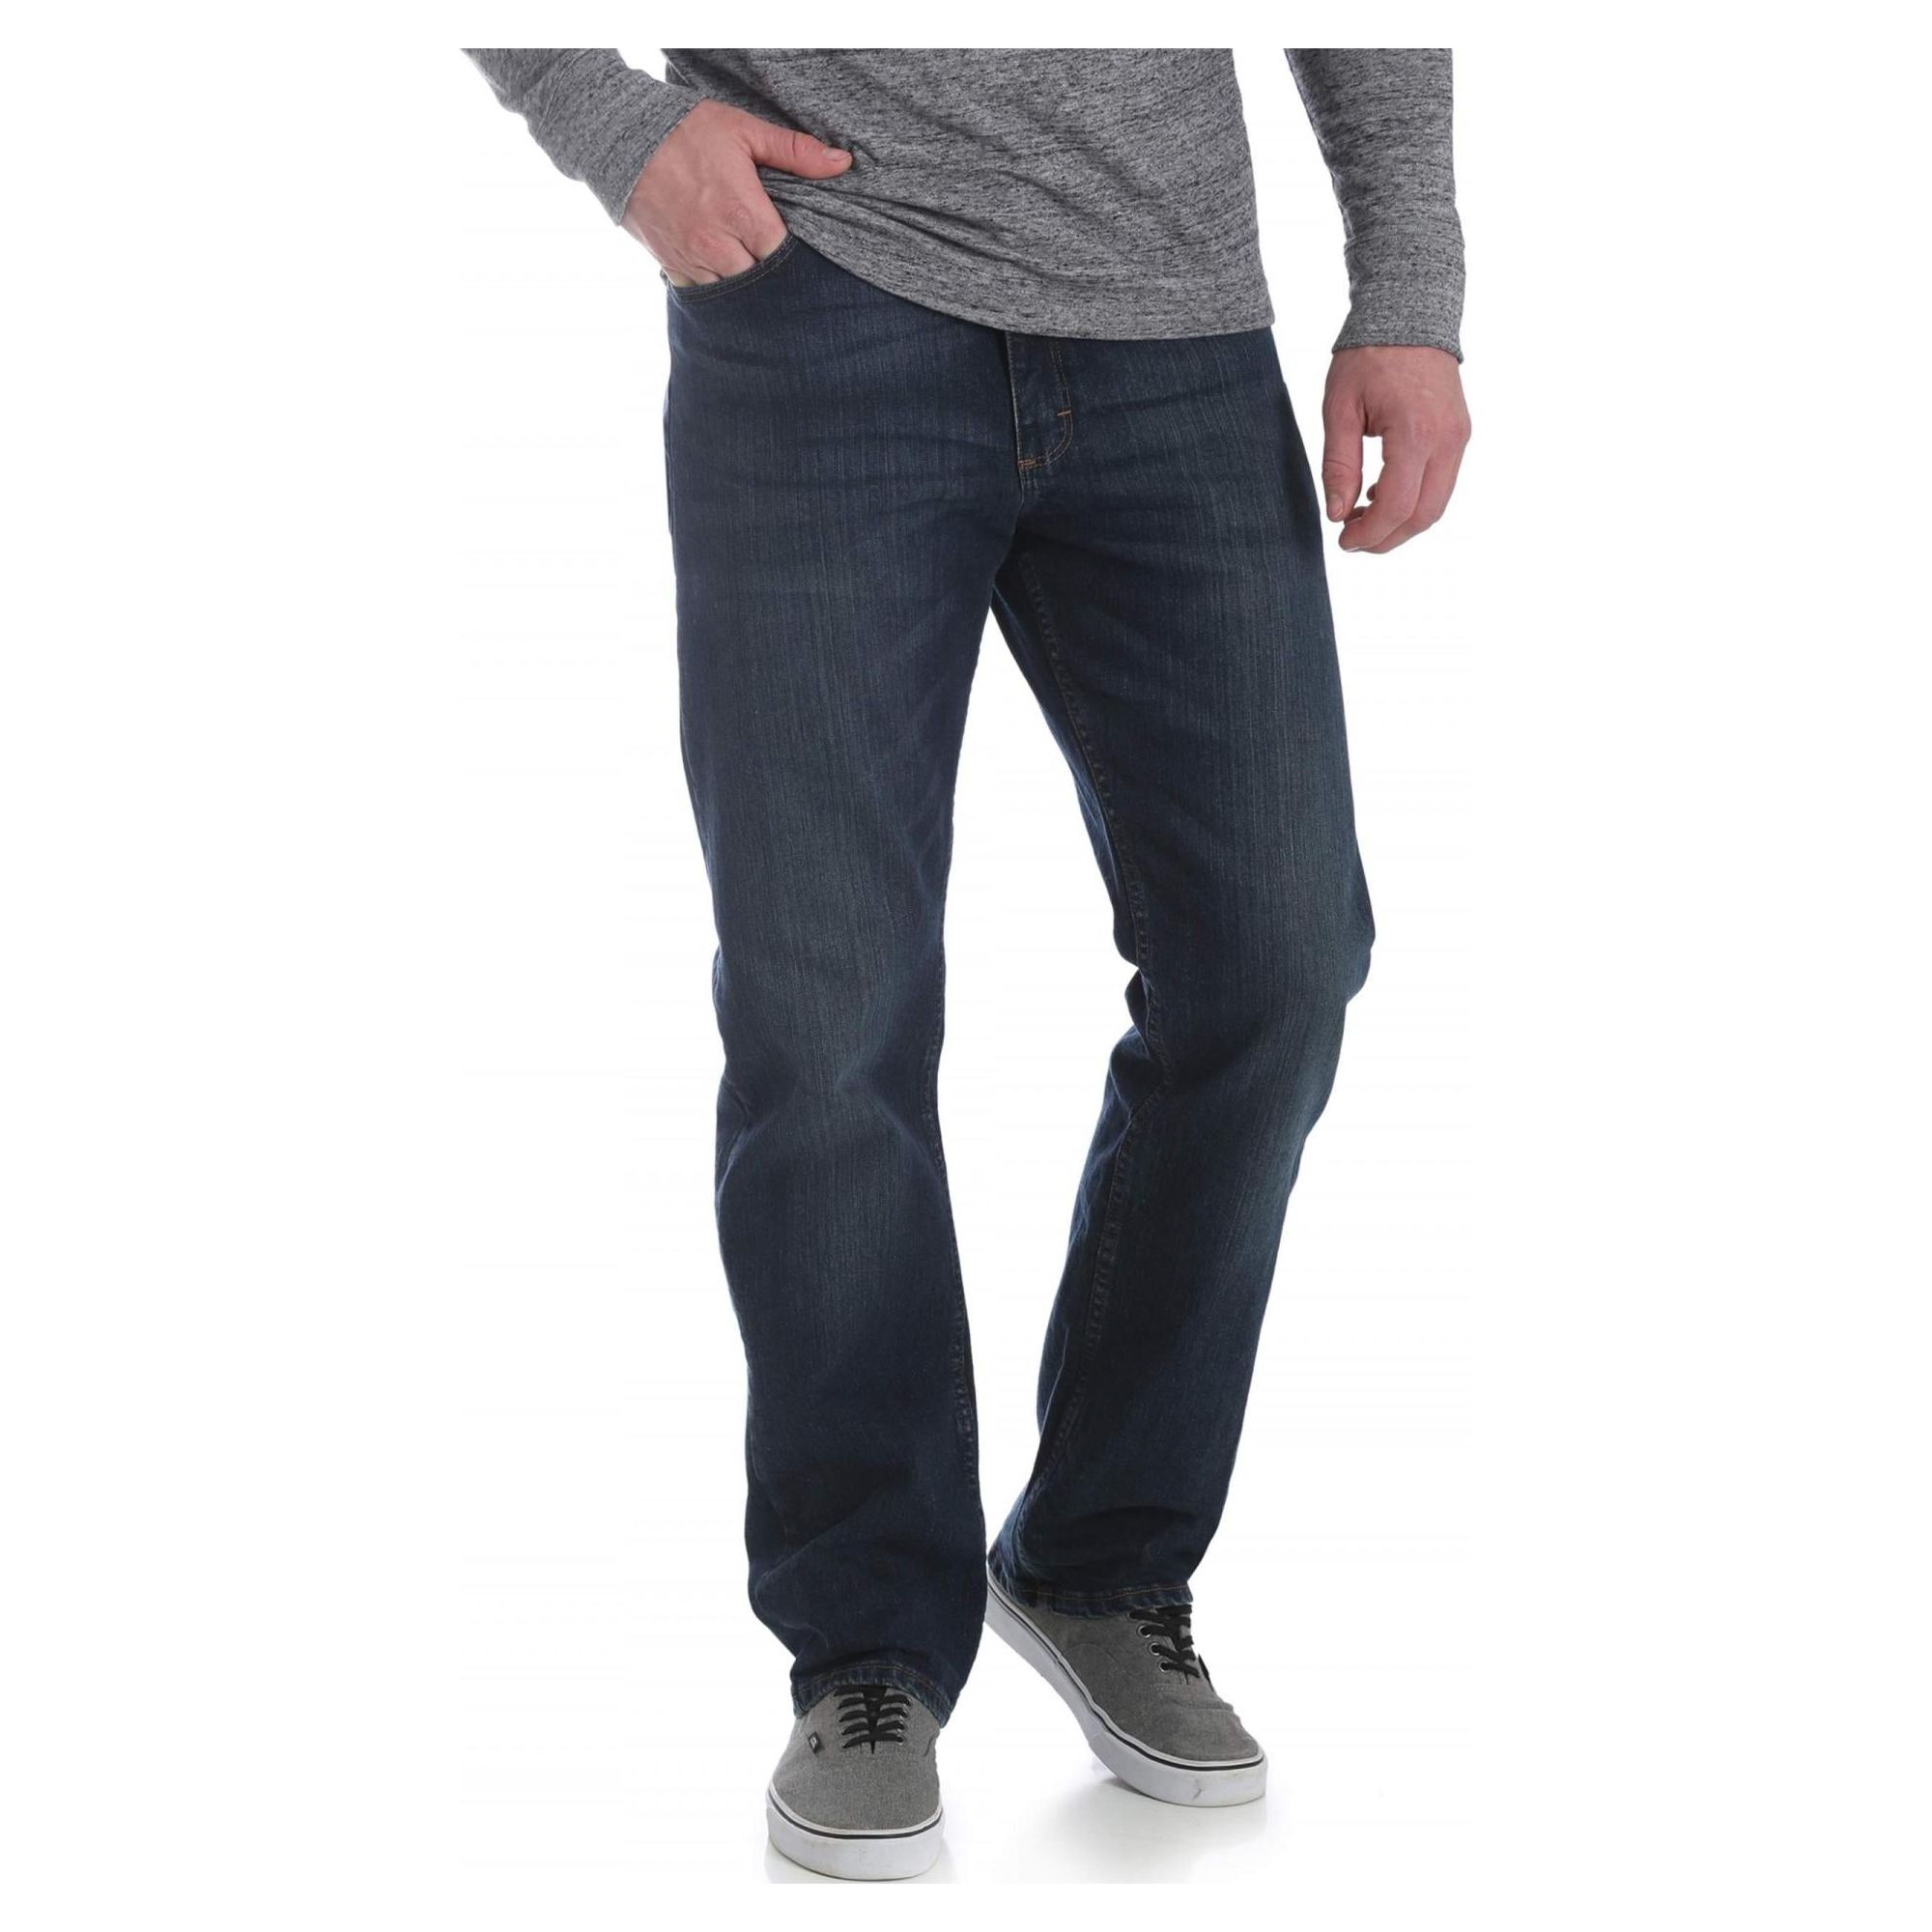 Wrangler Men's and Big Men's Relaxed Fit Jeans with Flex - image 1 of 8